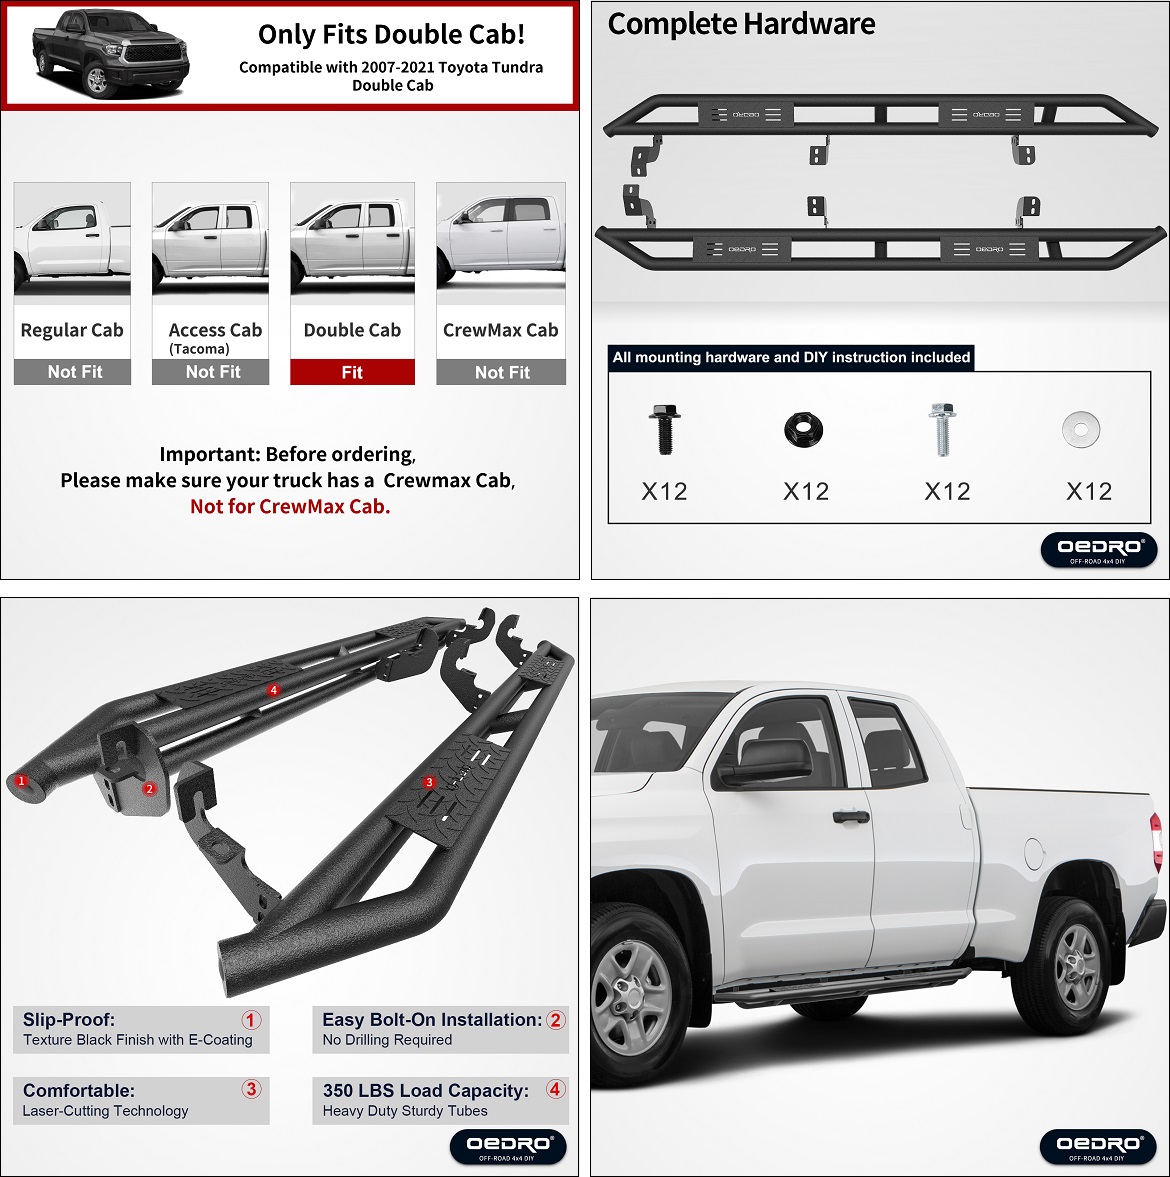 Mifeier 4 Bent Oval Side Step Nerf Bars Running Boards Fit 07-18 Toyota Tundra Double Cab with 2 Half Size Rear Doors 